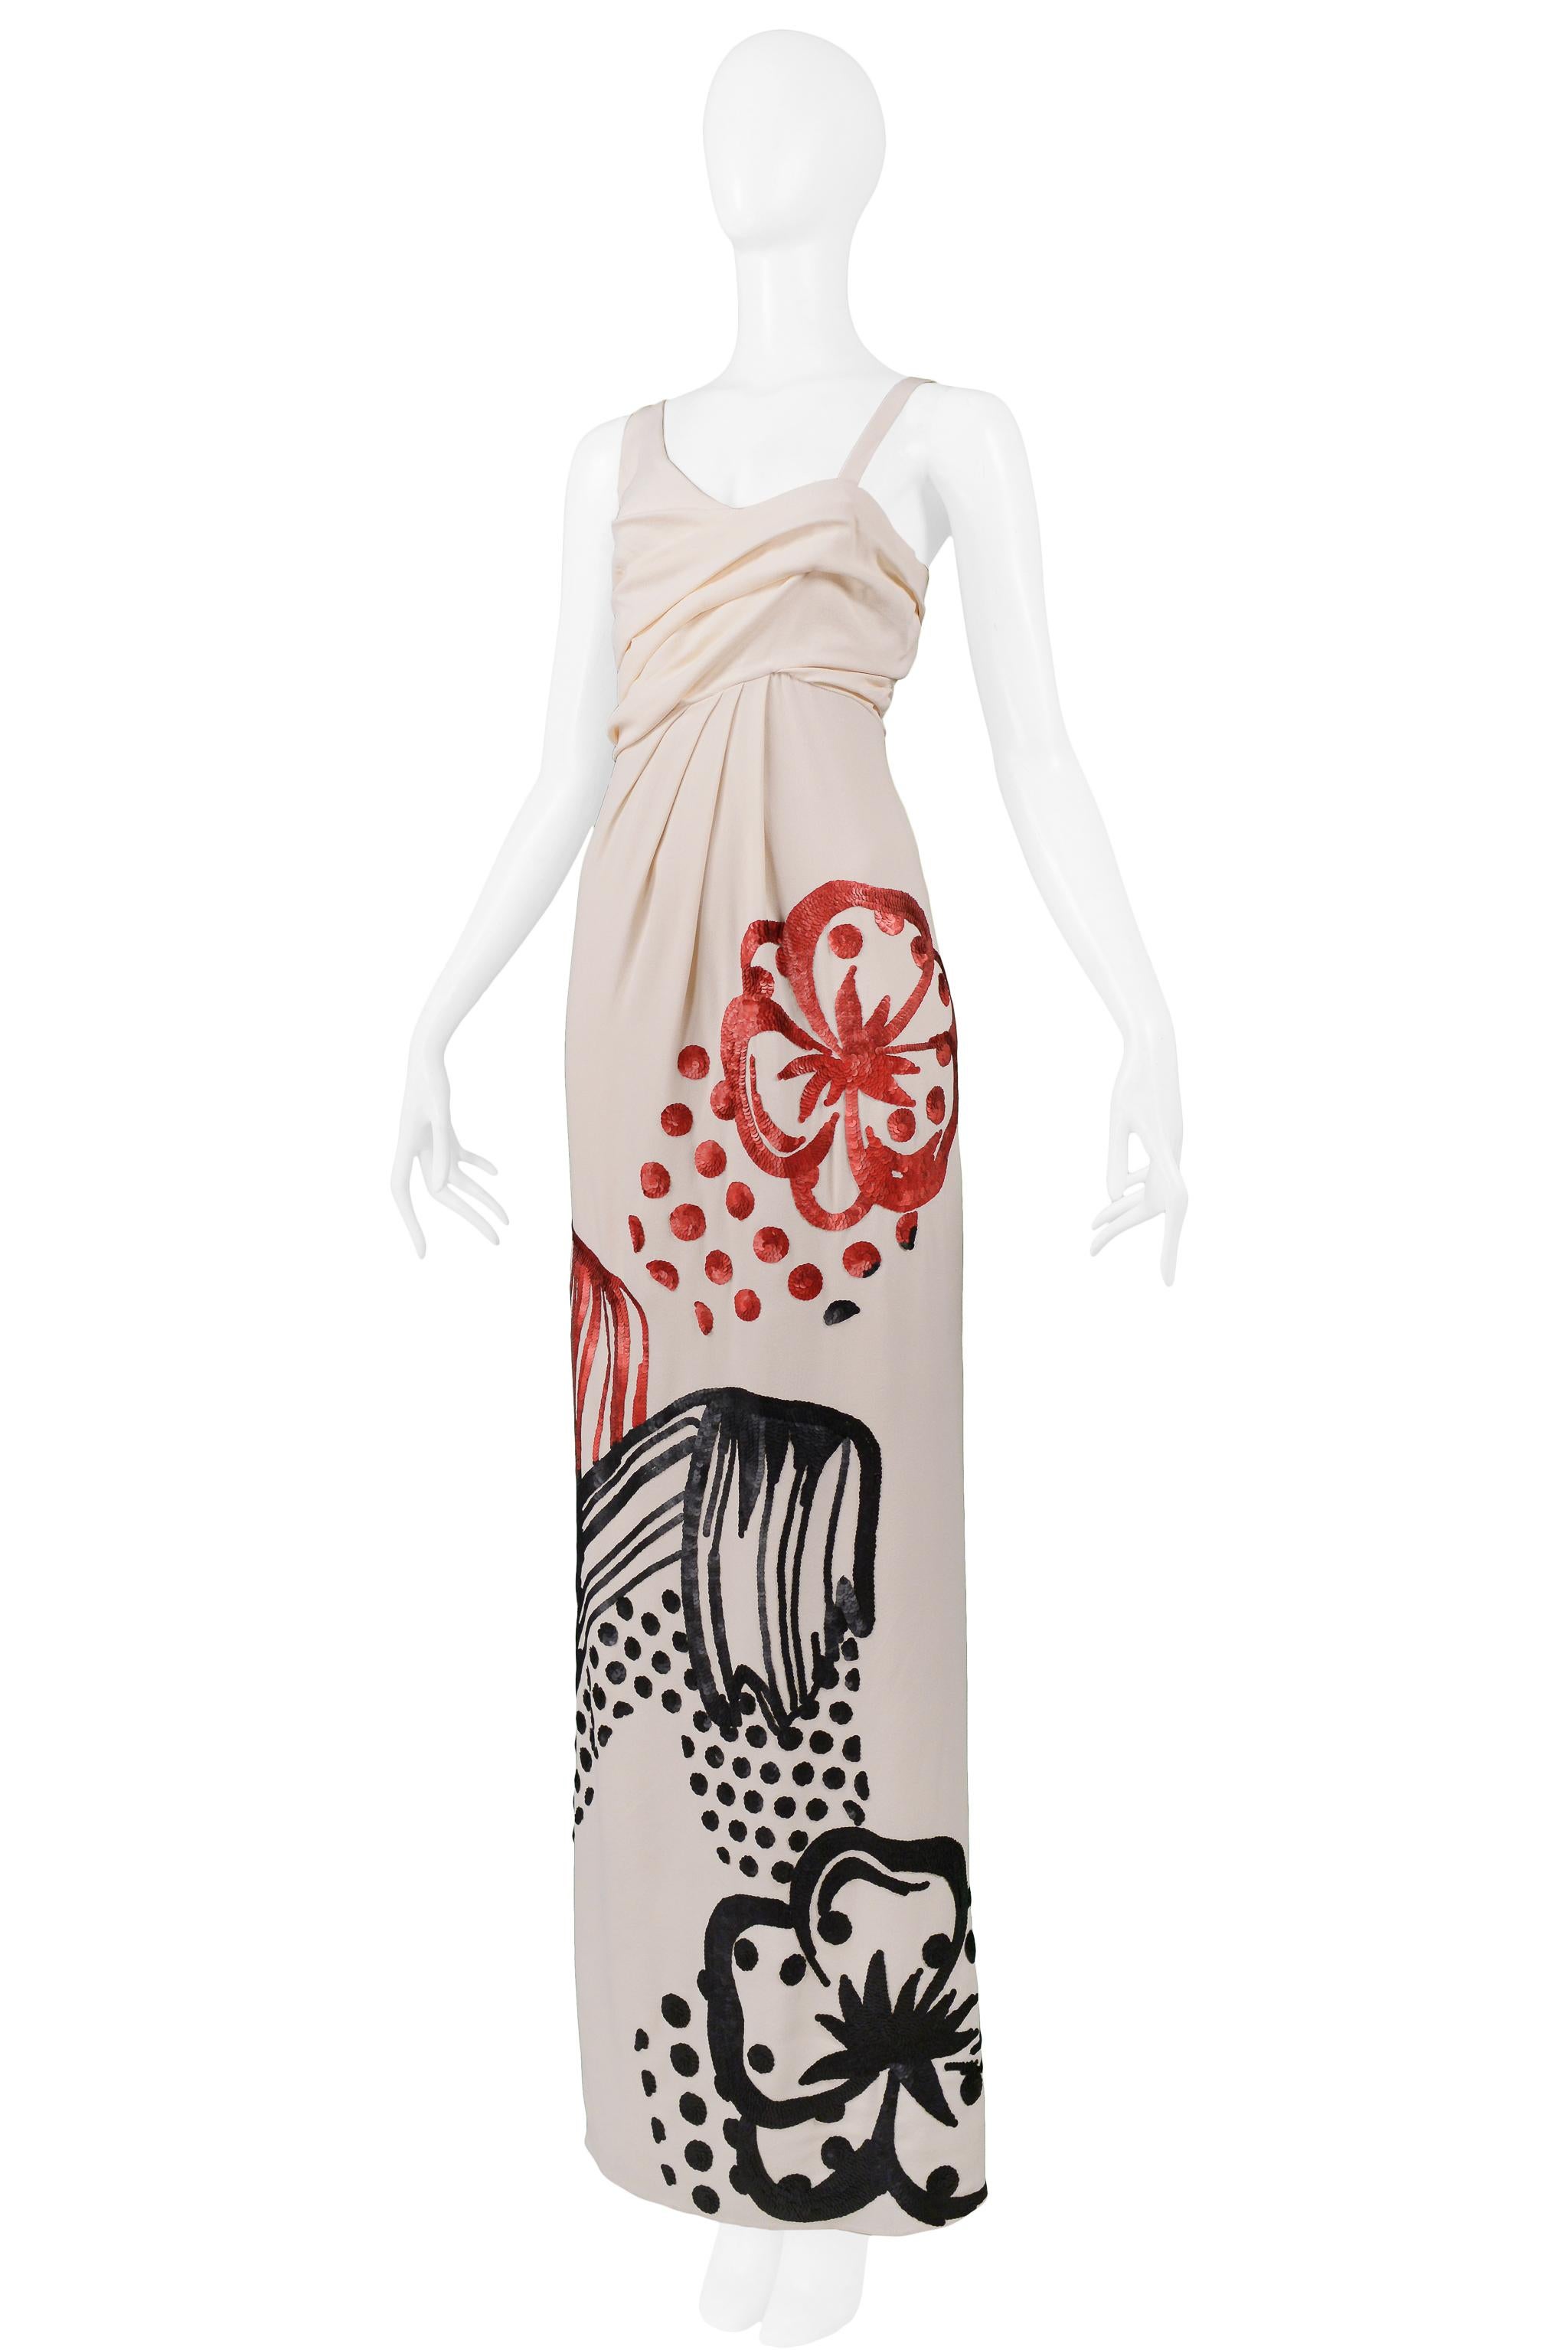 Women's Vintage John Galliano Cream Gown with Black & Red Sequins 2007 For Sale